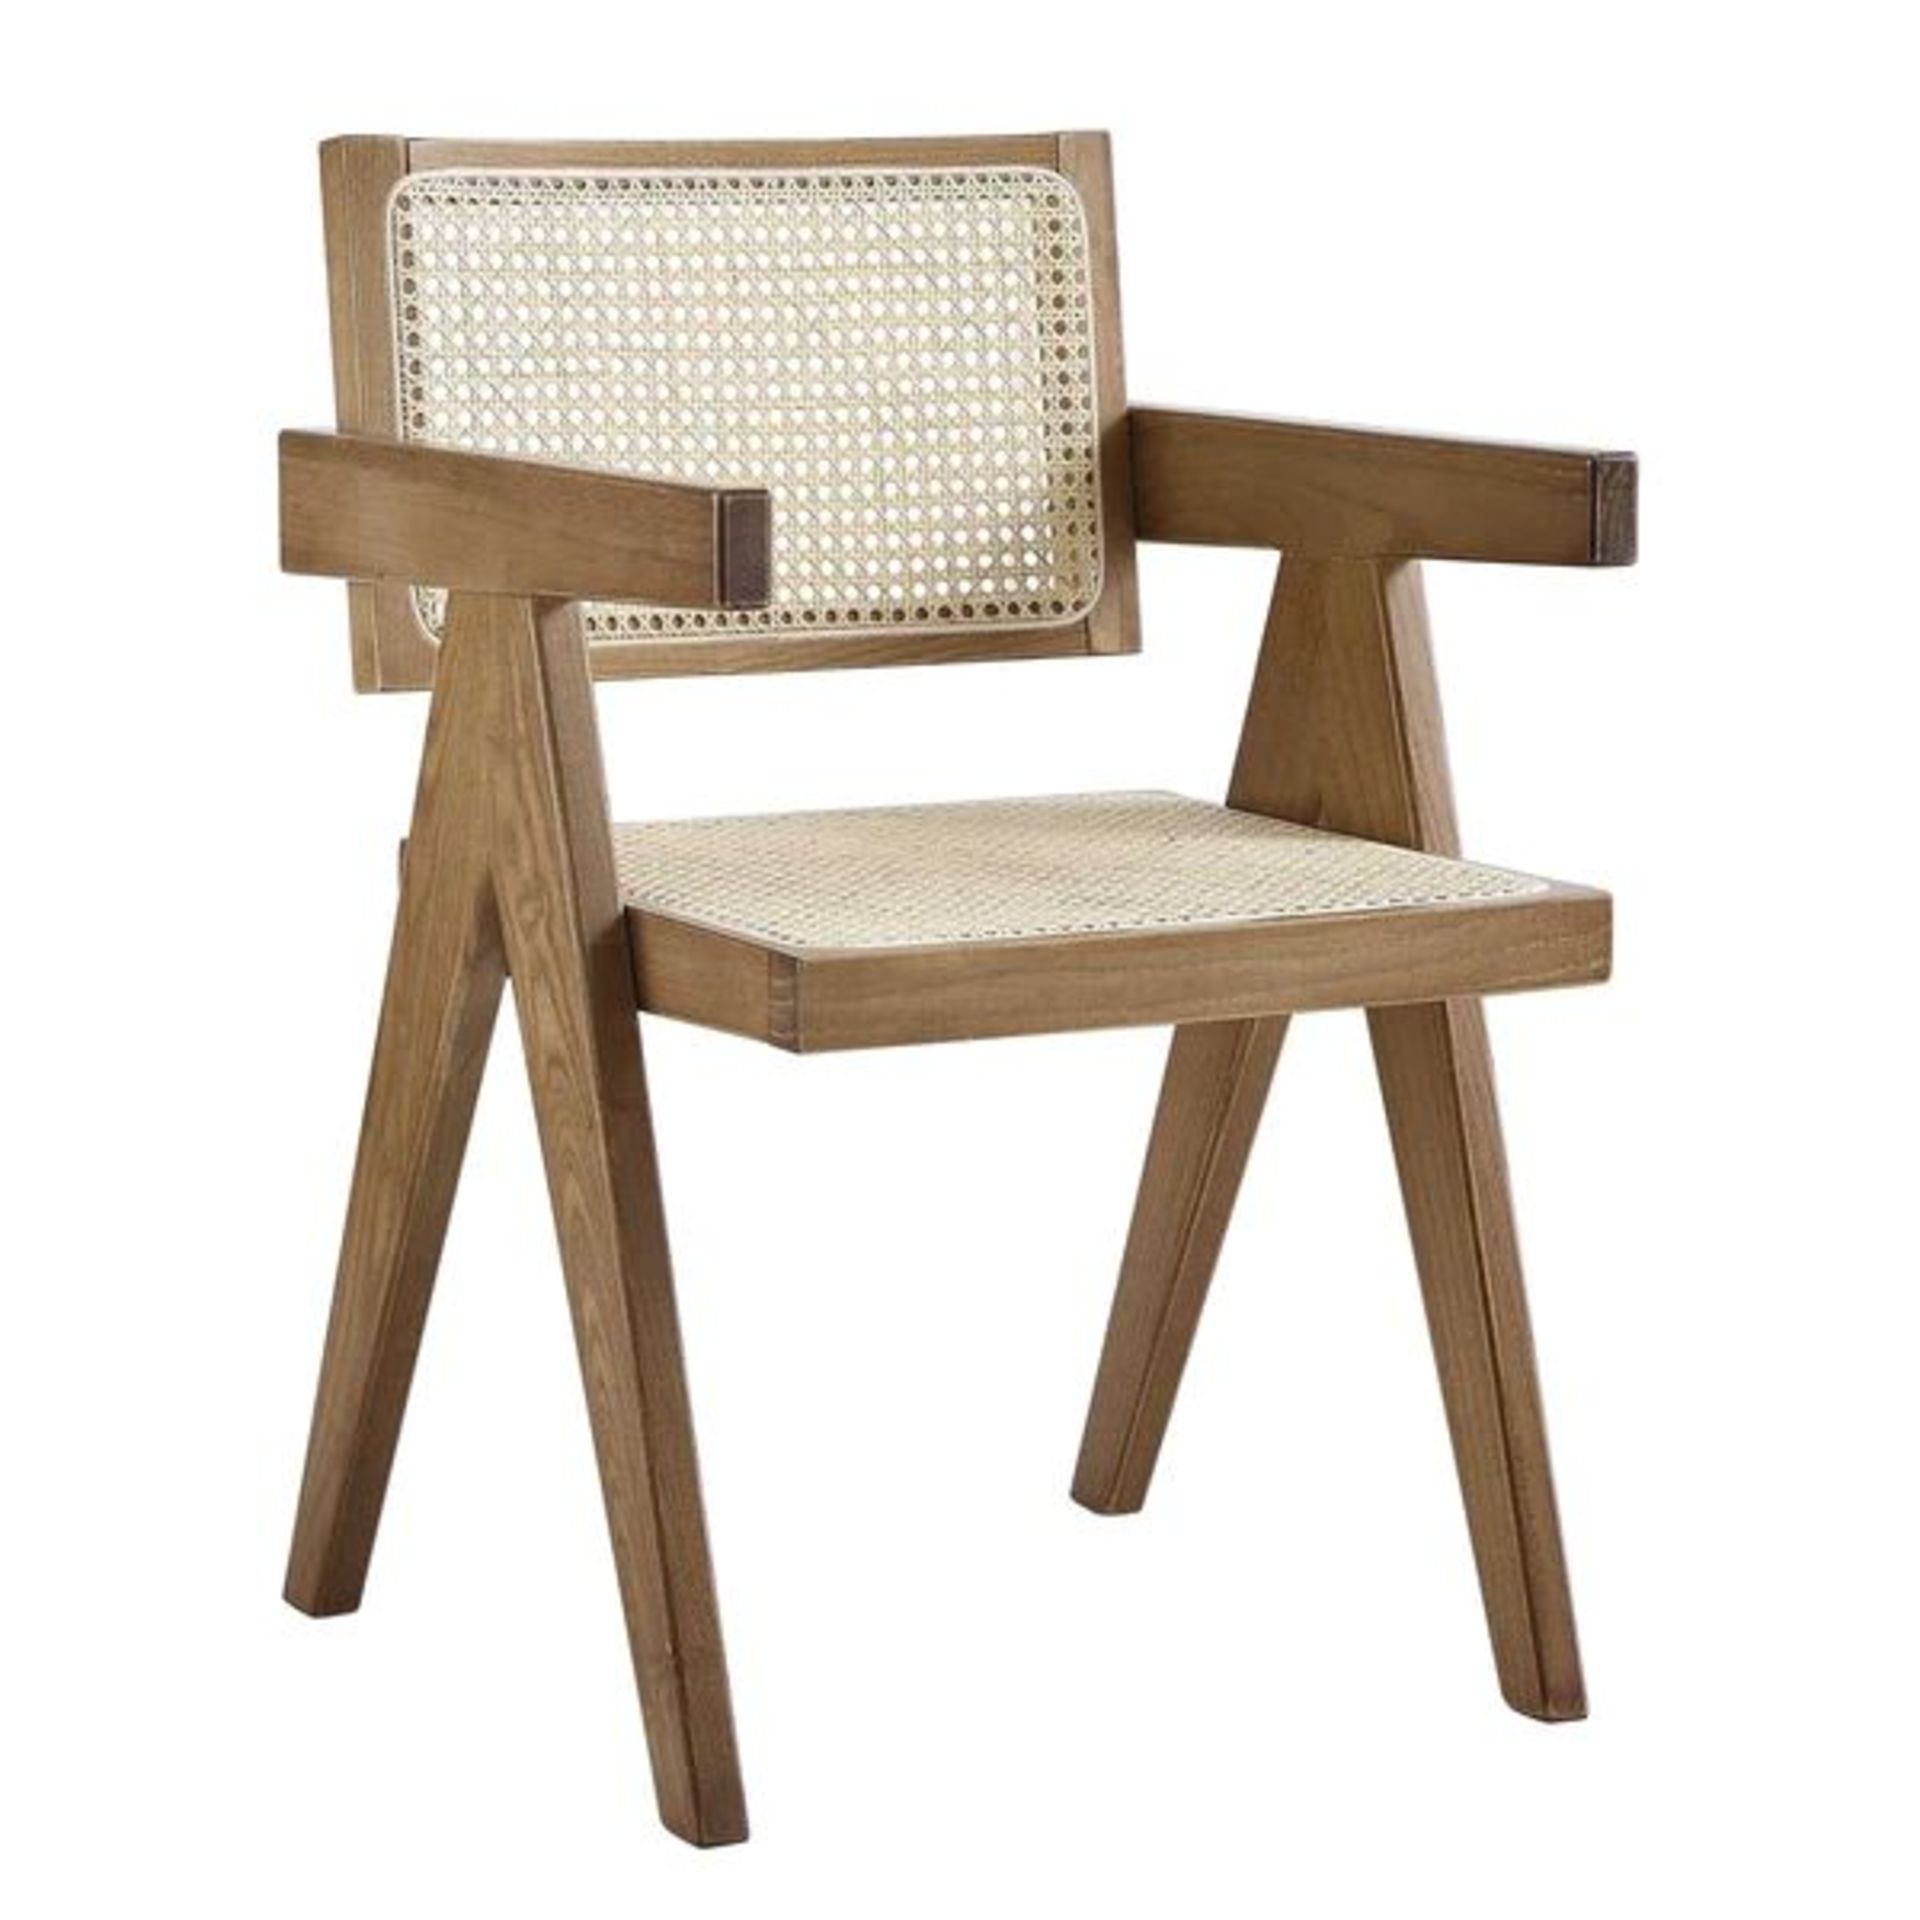 Jeanne Light Walnut Cane Rattan Solid Beech Wood Dining Chair. - SR24. RRP £209.99. The cane